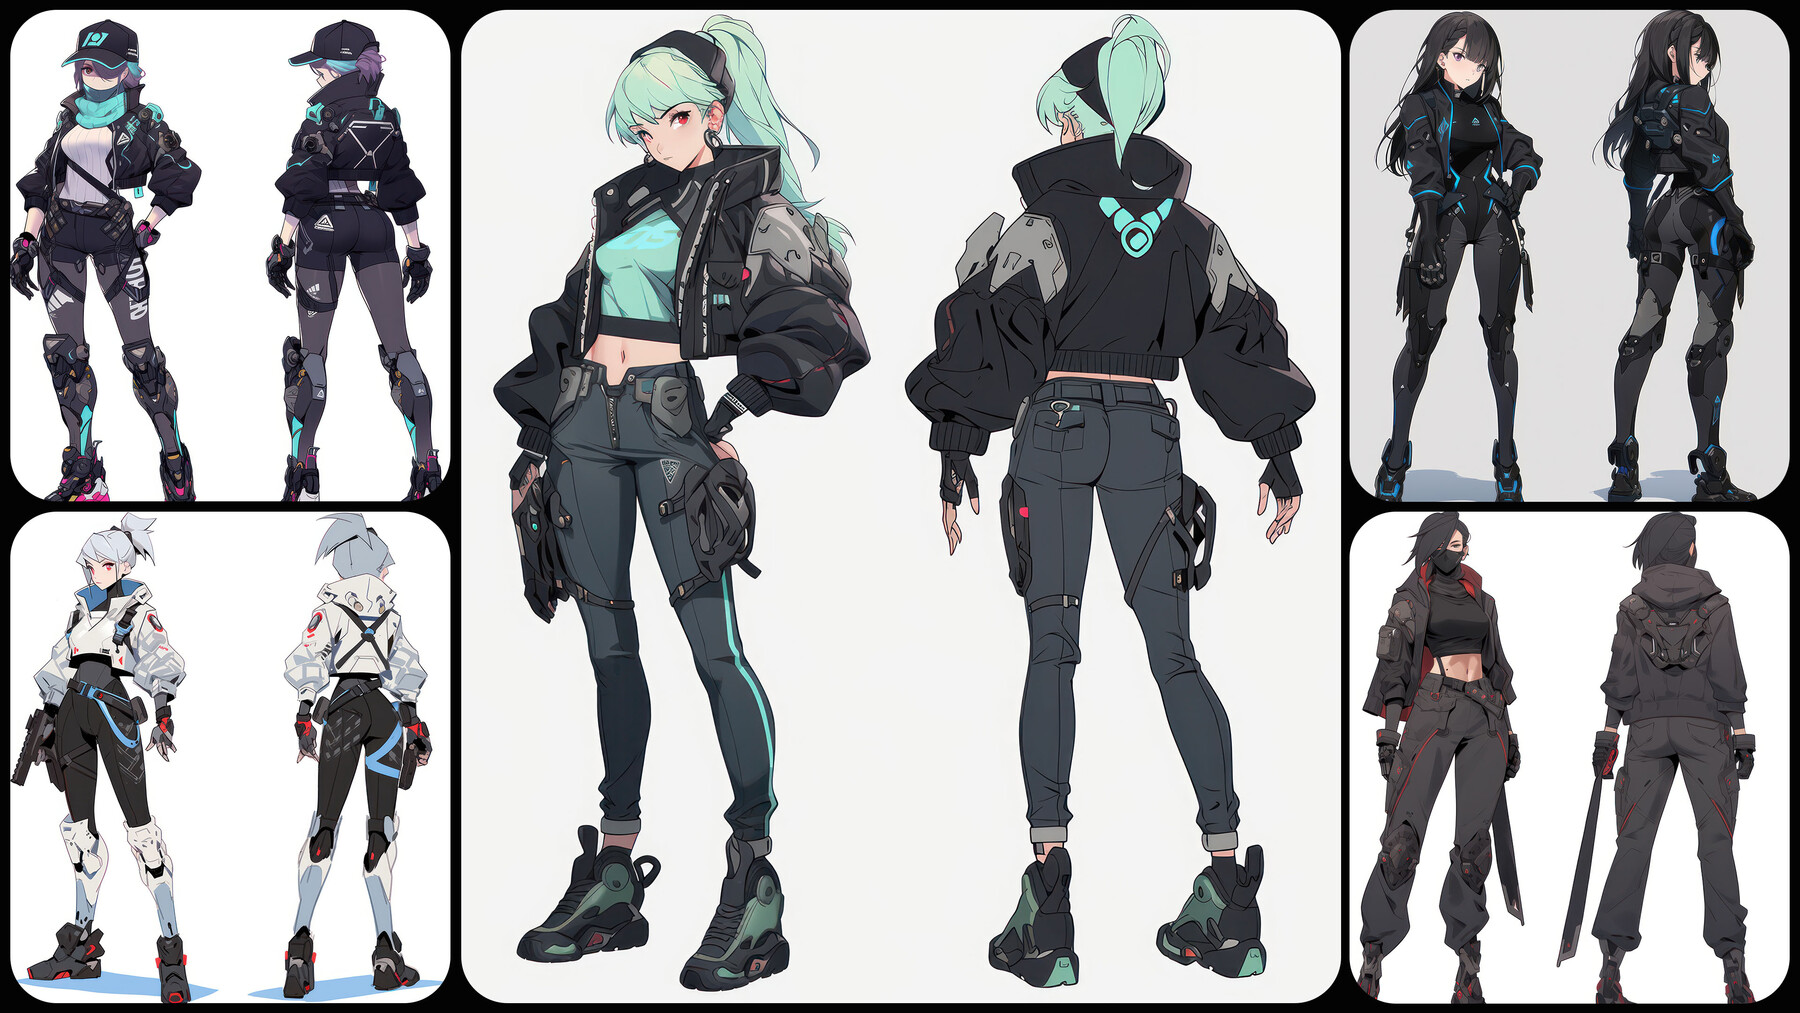 Anime Cyberpunk Character Portraits in 2D Assets - UE Marketplace